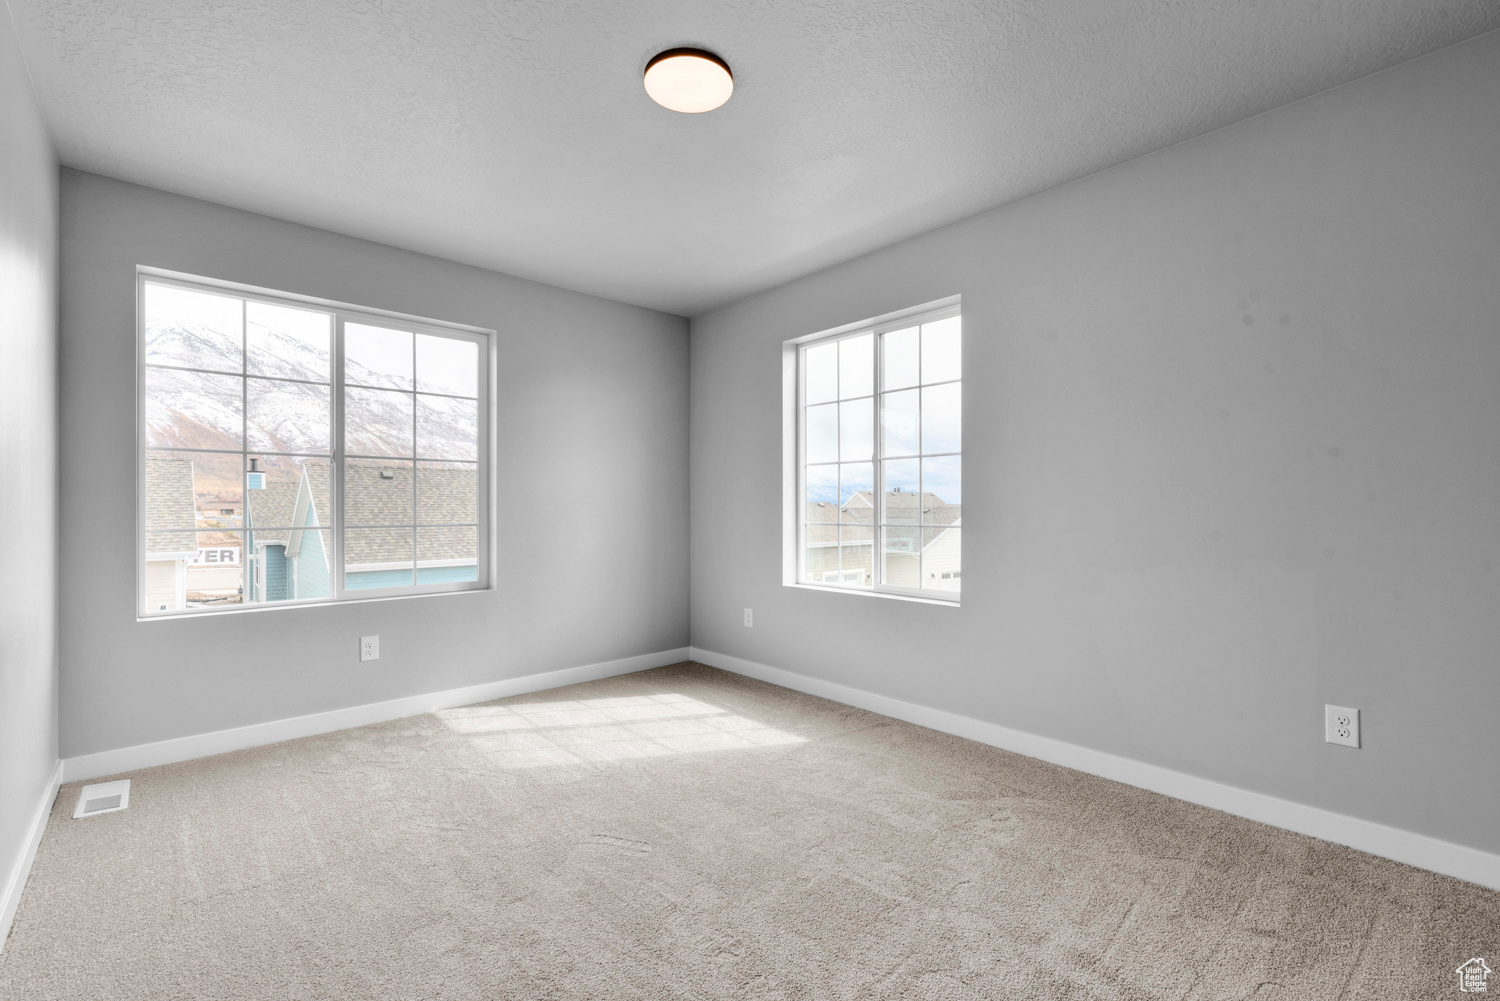 Carpeted empty room with plenty of natural light and a textured ceiling